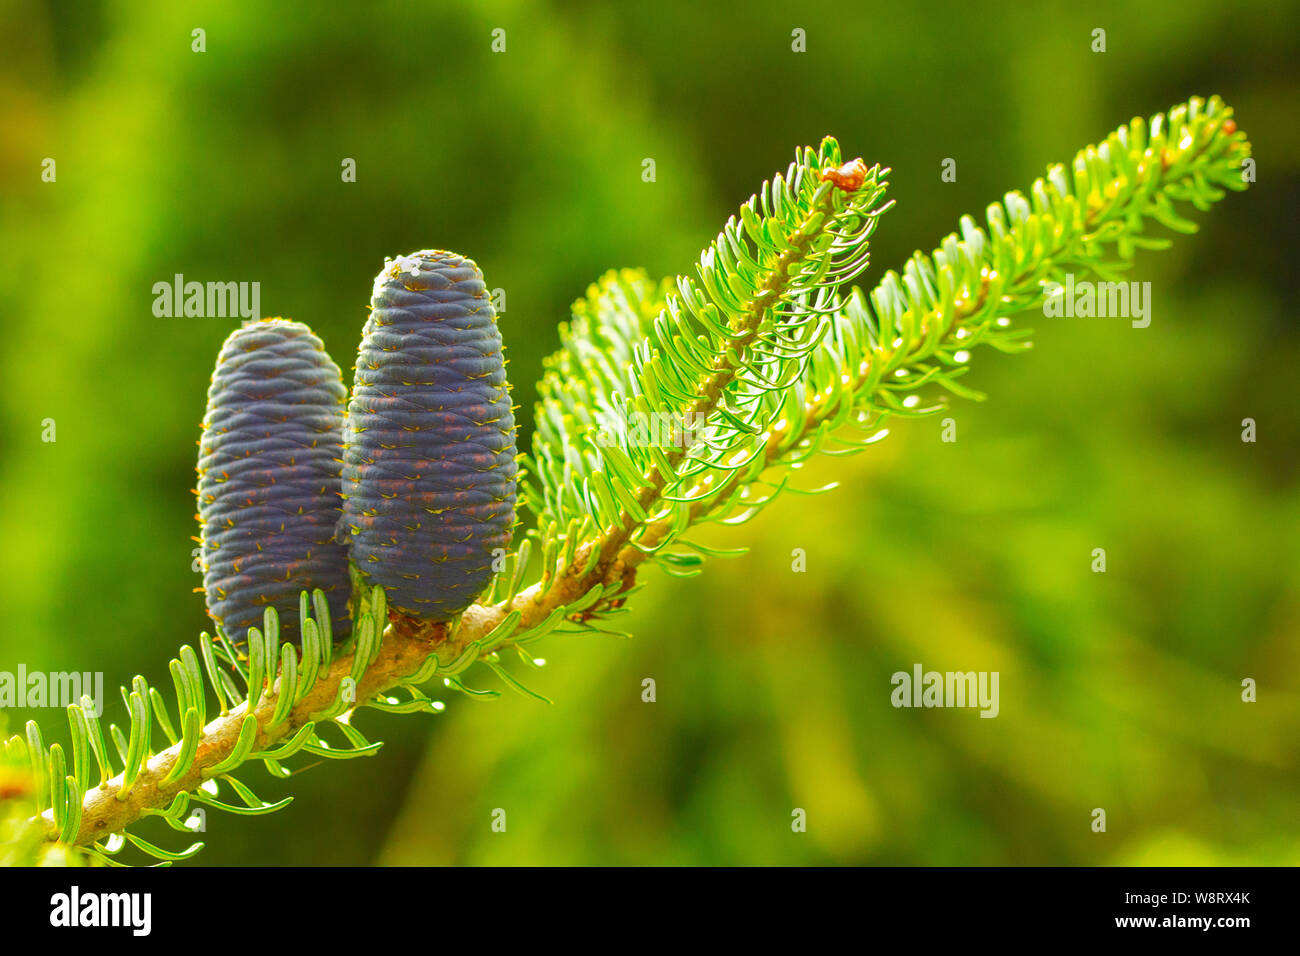 Korean fir, coniferous tree with minimus blue cones and bright green needles. Two purple cones on the fir branch with pine leaves Stock Photo